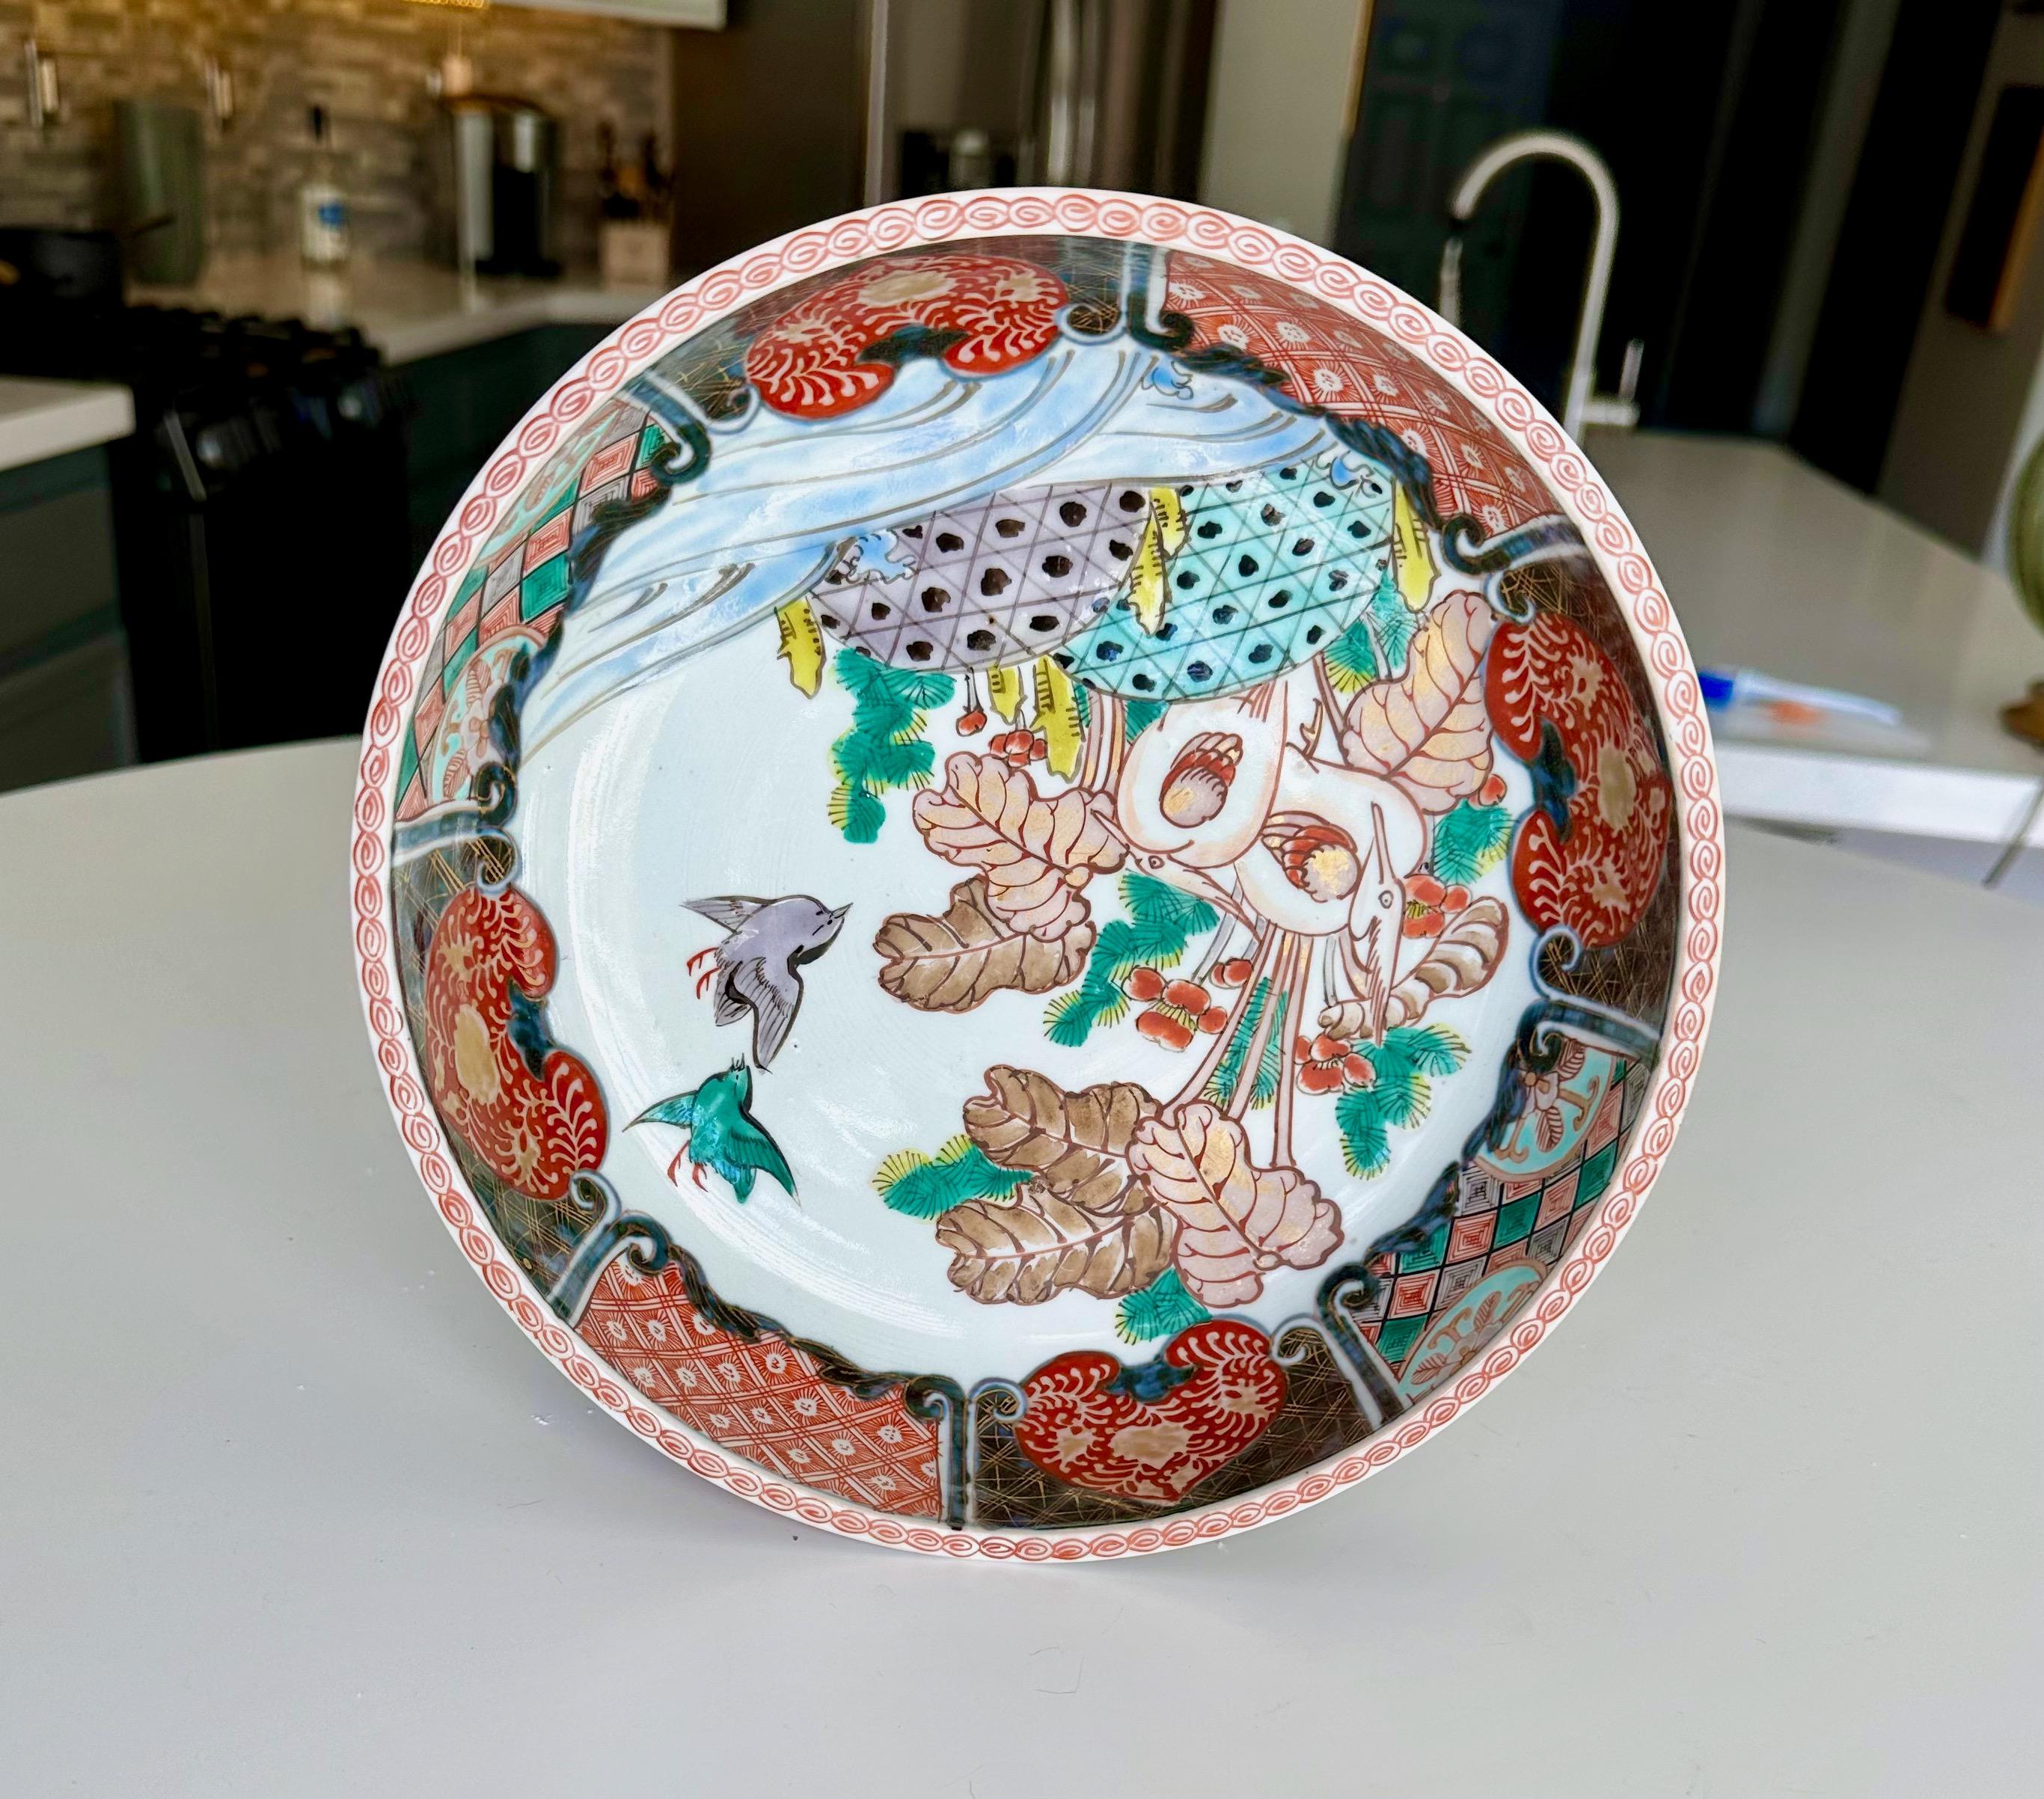 Hand painted porcelain Japanese Imari bowl with birds, leaves and floral motif.